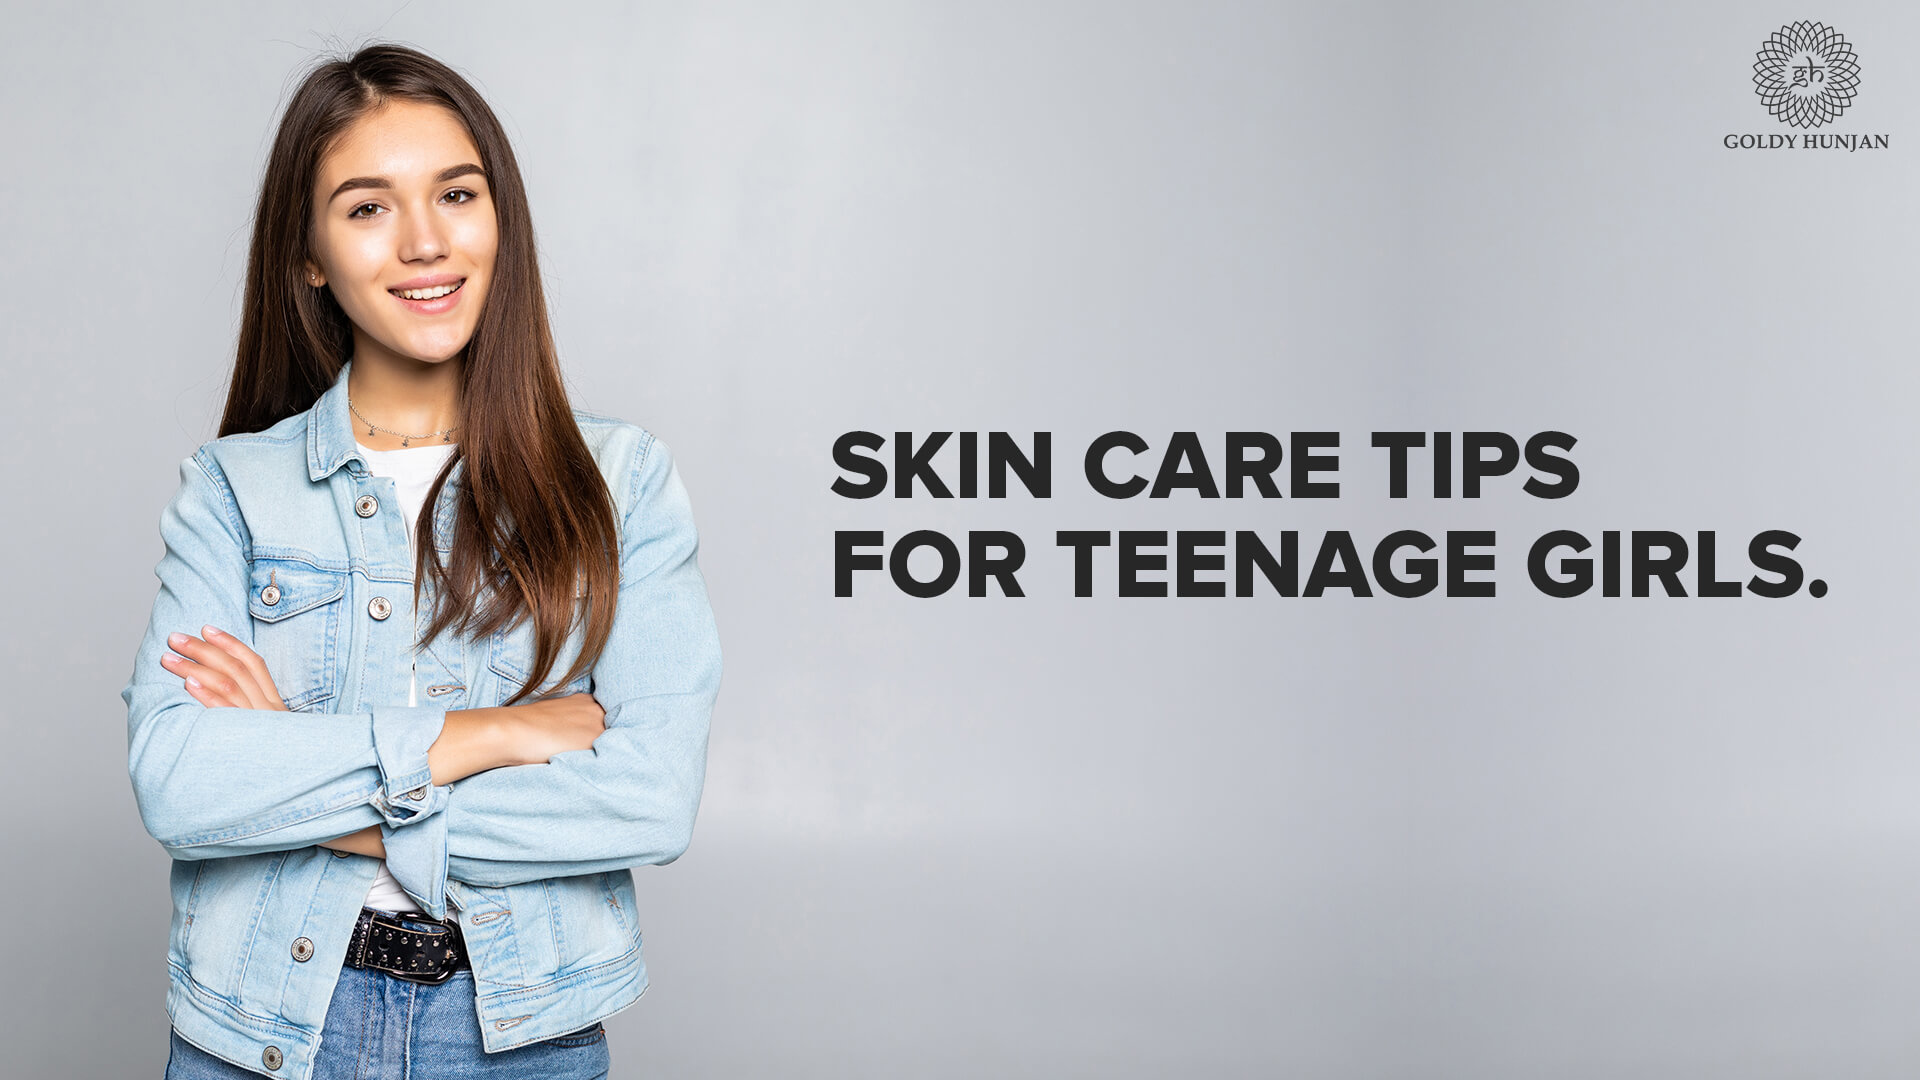 9. "Blonde Hair Care for Active Teenage Girls: Tips for Keeping Your Hair in Place" - wide 2